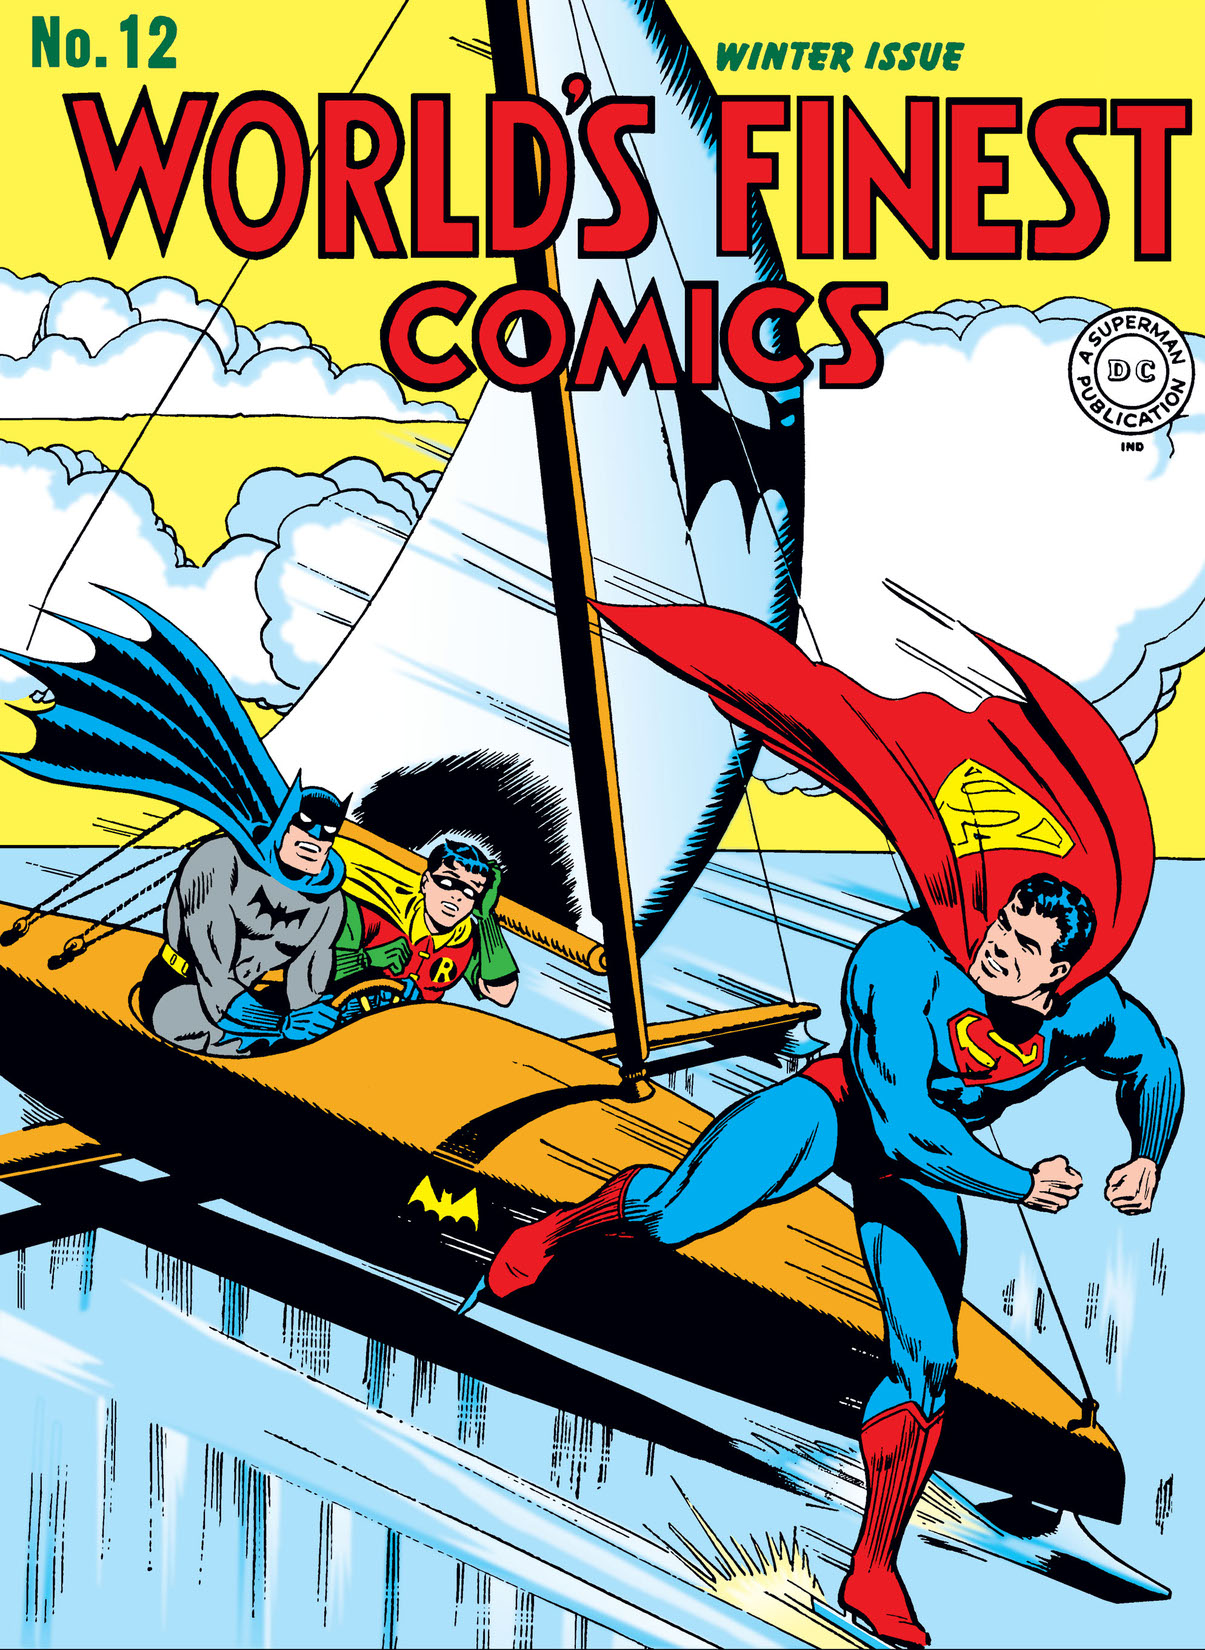 World's Finest Comics (1941-) #12 preview images